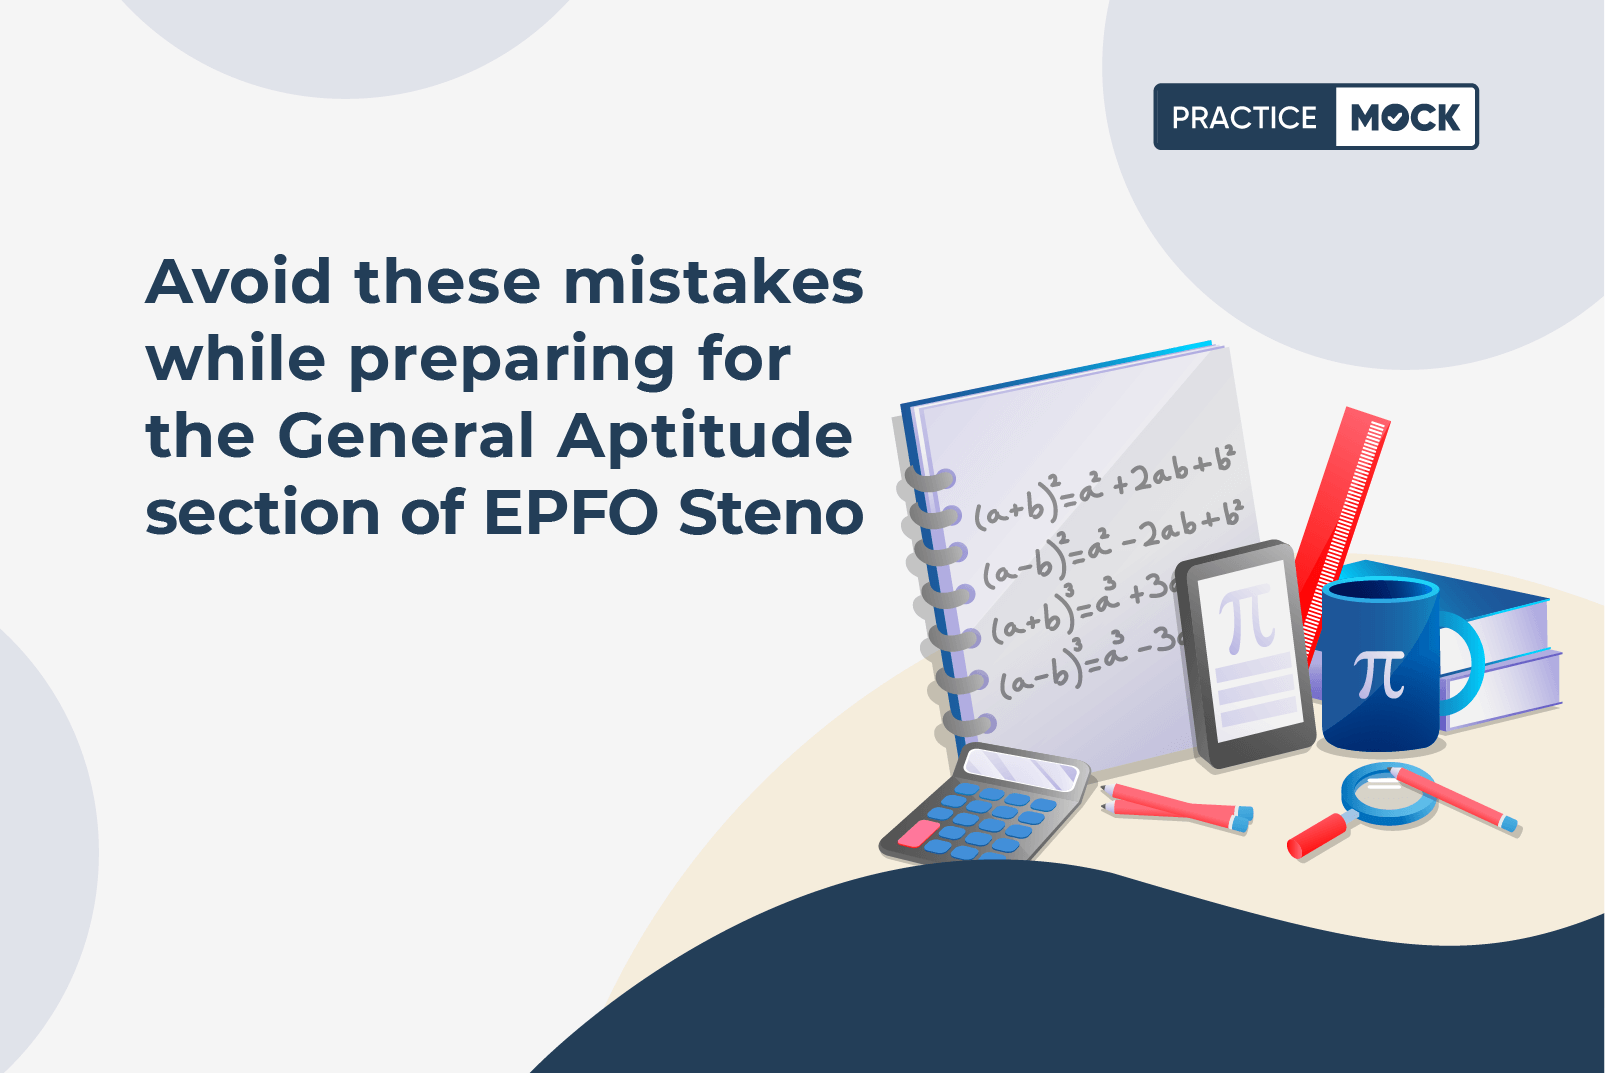 Avoid these mistakes while preparing for the General Aptitude section of EPFO Steno